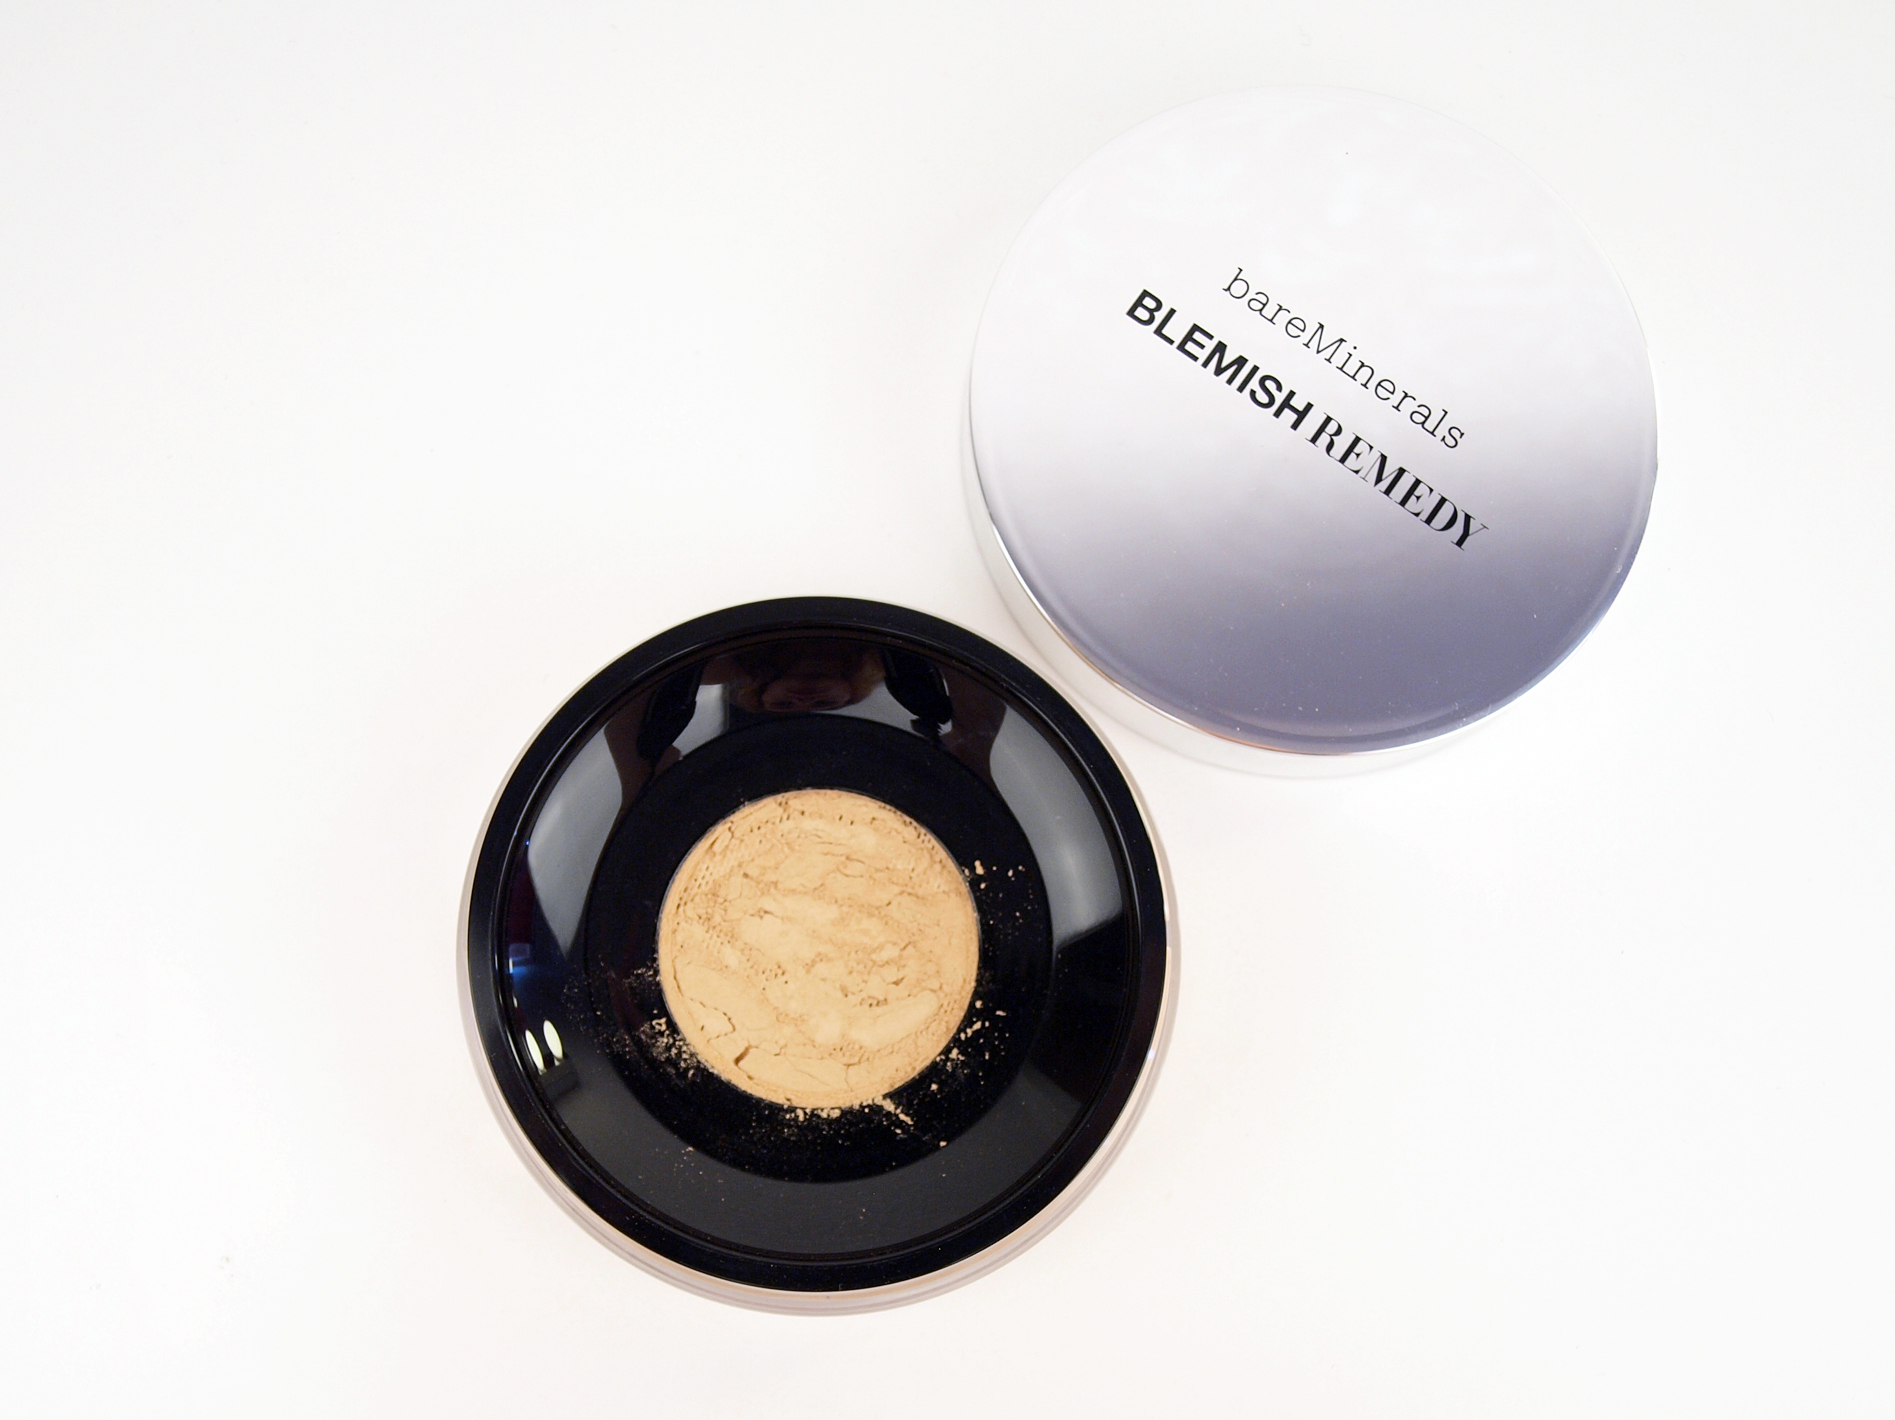 bareminerals blemish remedy foundation clearly cream 08